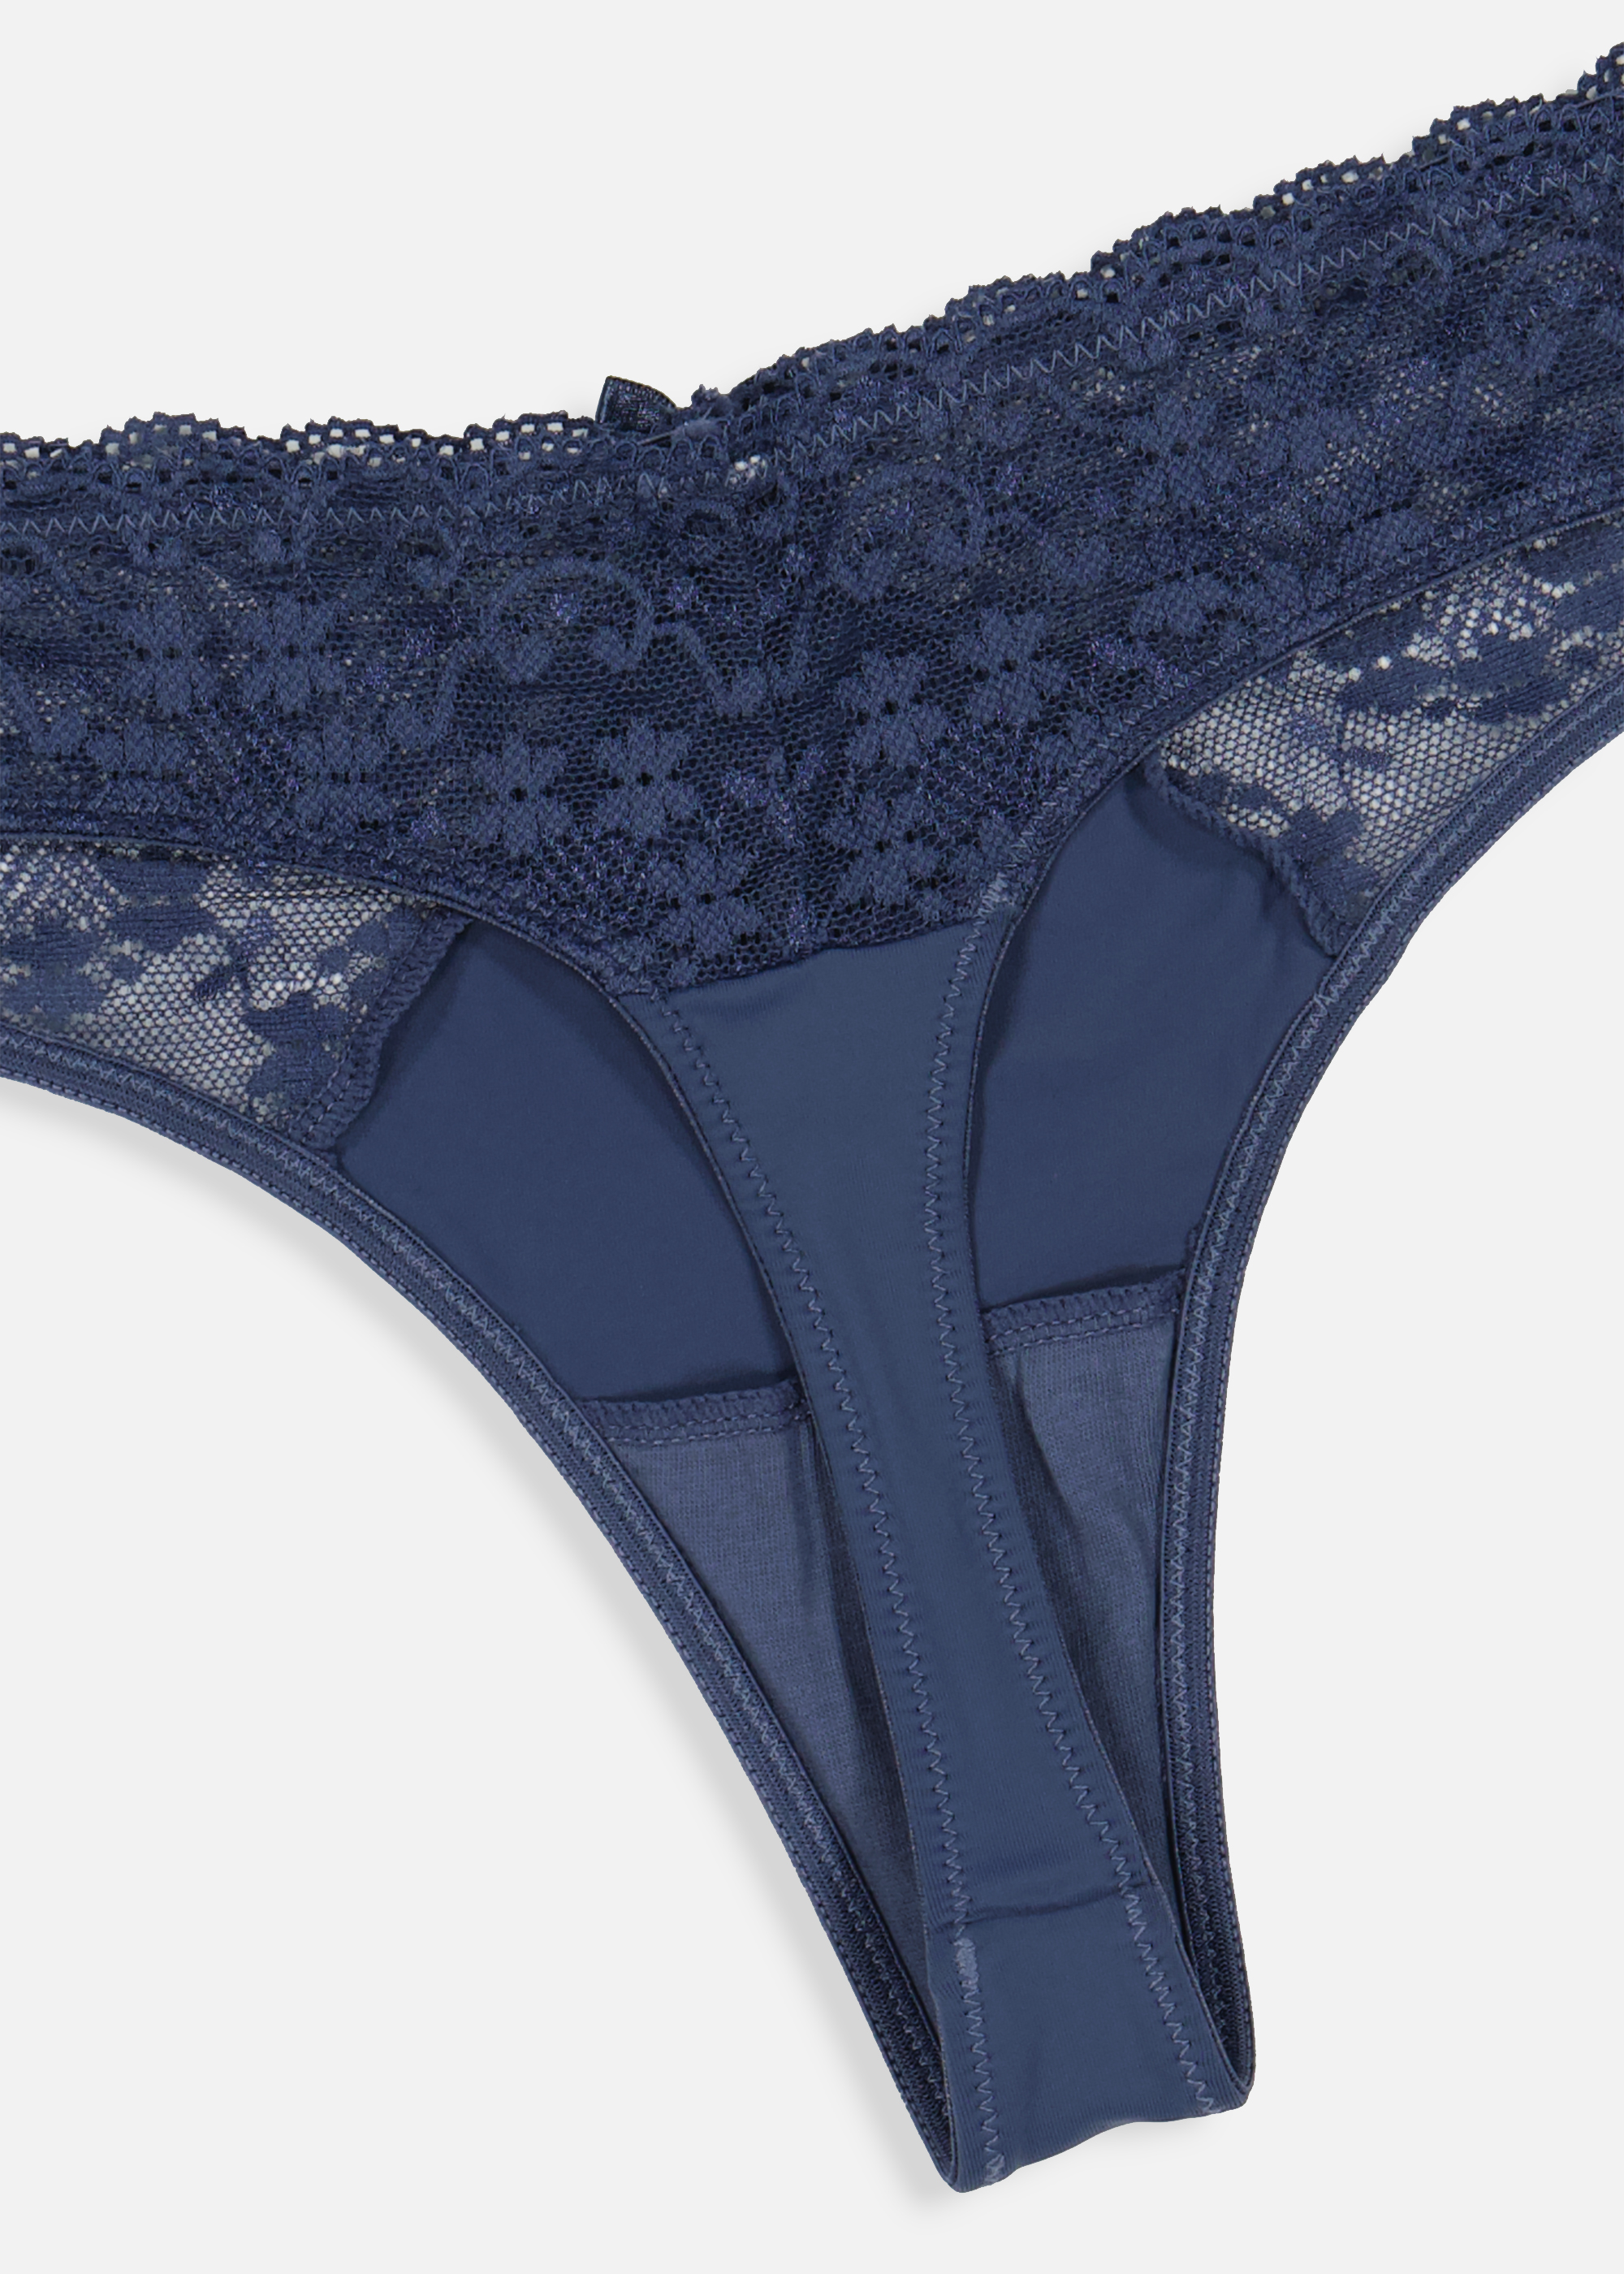 Lace Inset Microfibre G-string